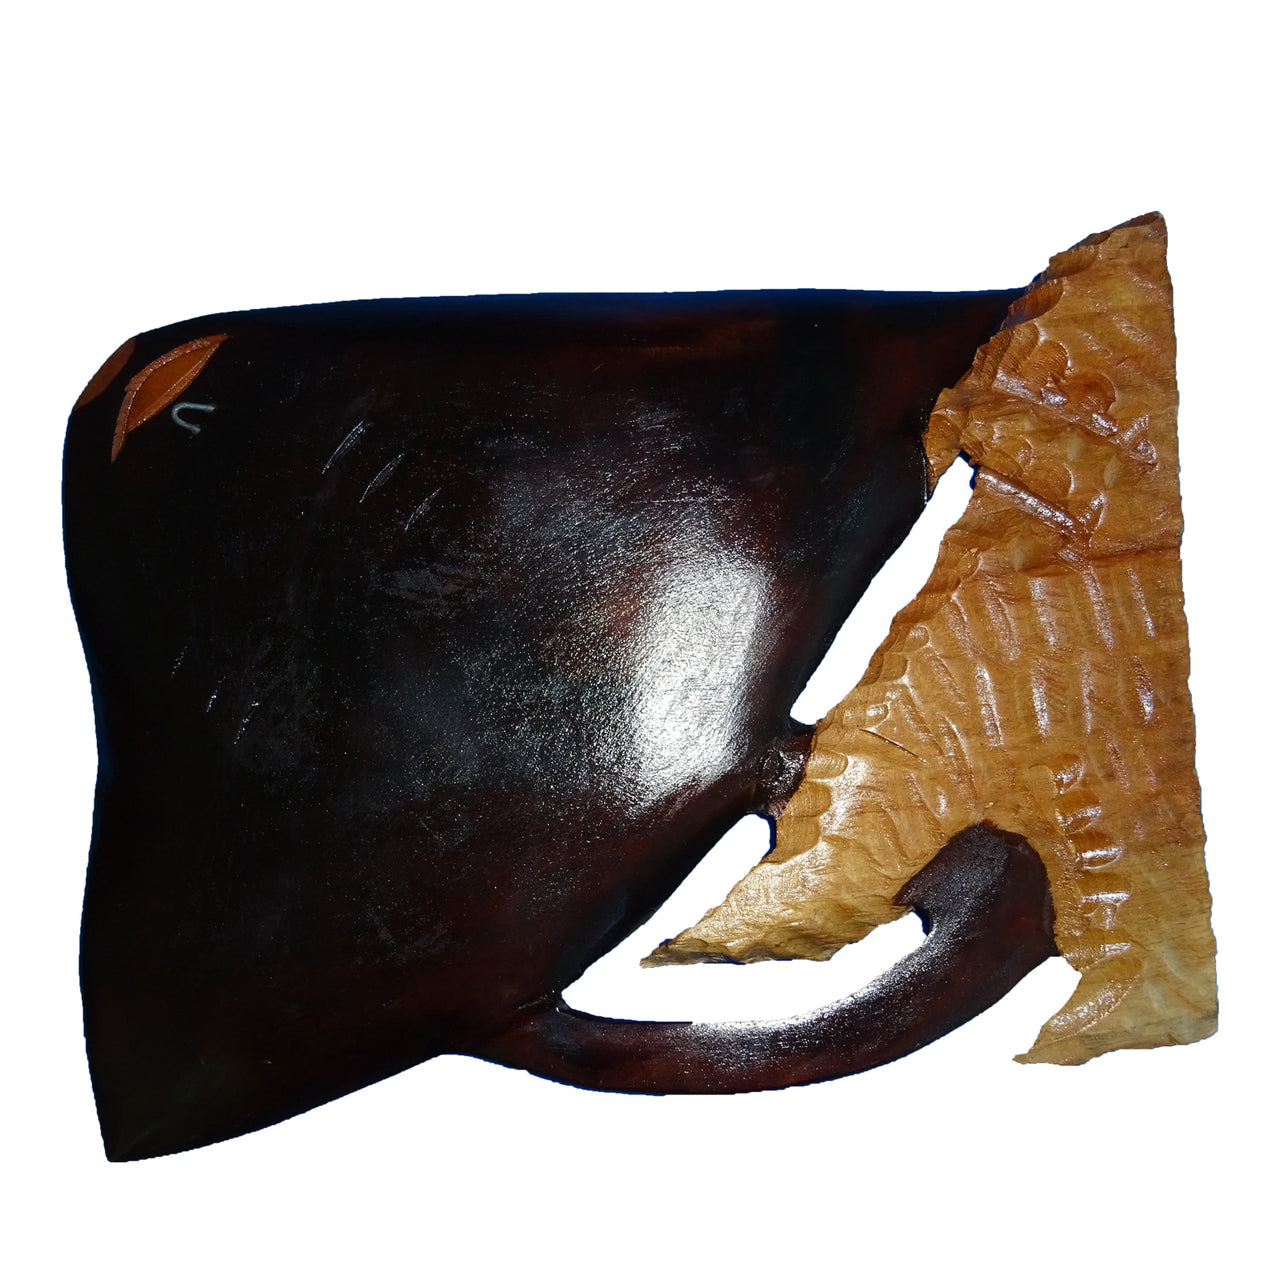 Fire Sale! Hand Carved Stingray Wood Sculpture Wall Hanging Home Decor Nautical Statue